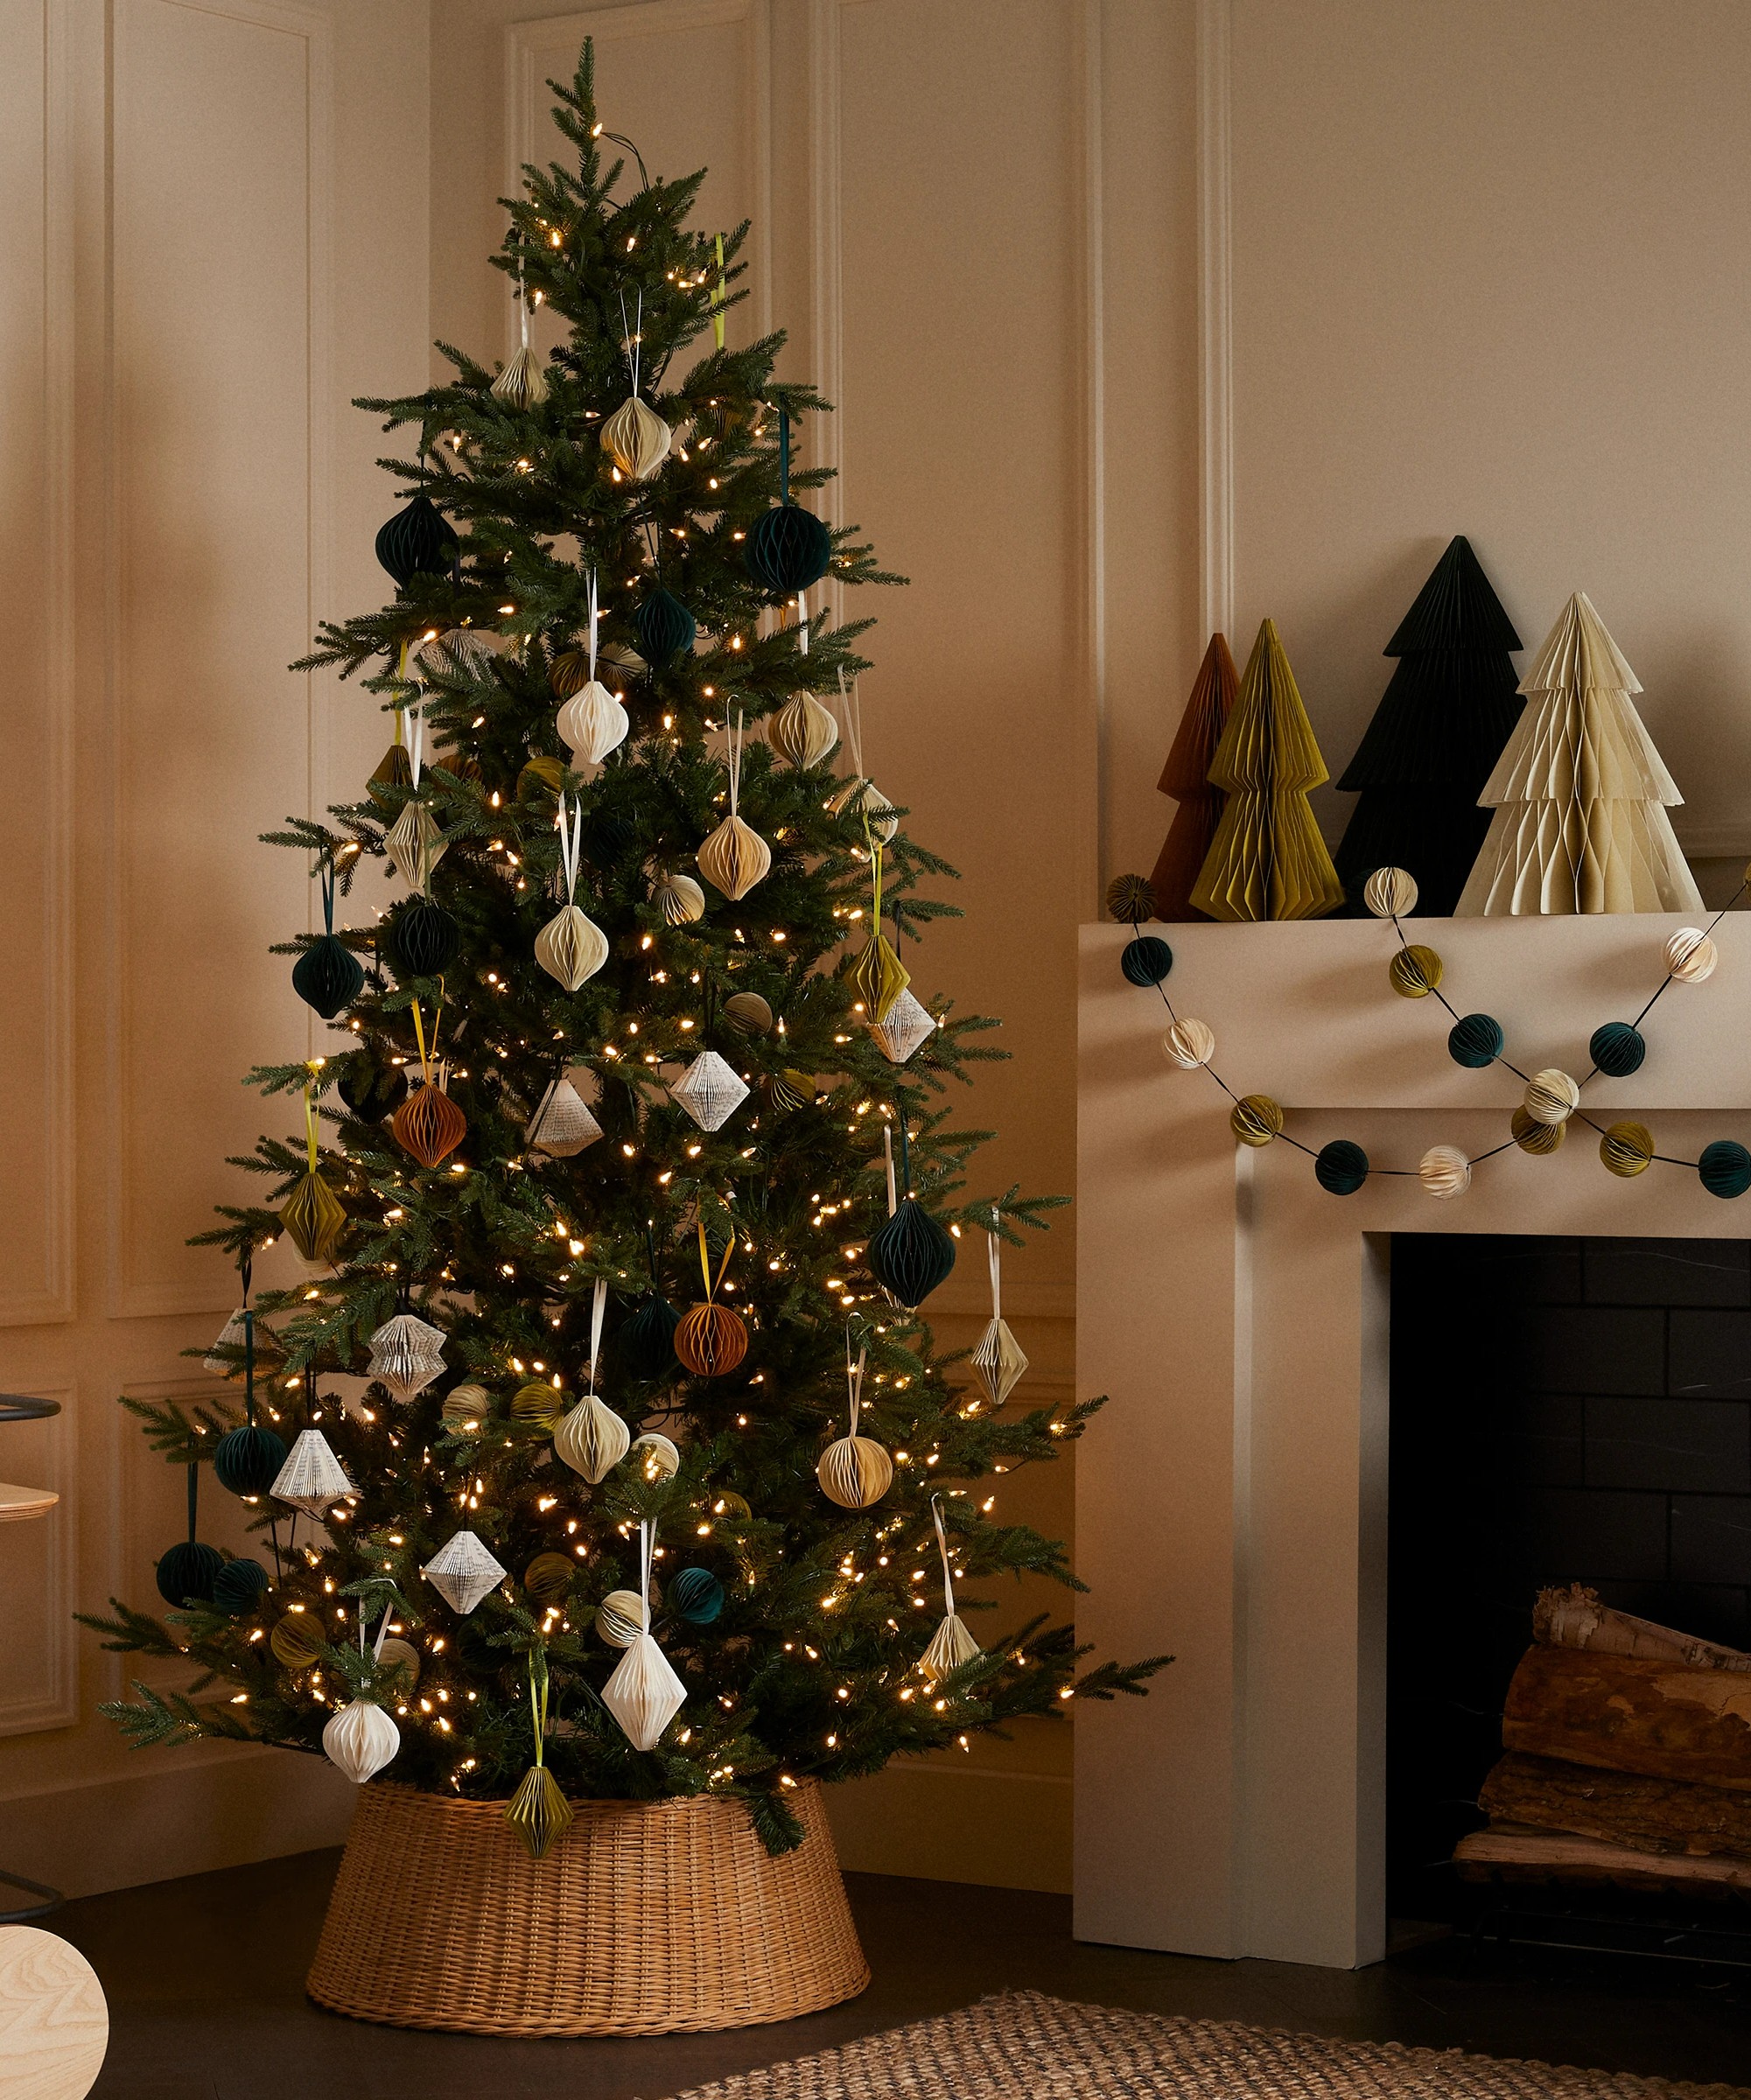 A Christmas tree decorated with a mix of ornaments, ribbons and lights. The tree is displayed in a room with a white wall and it standing beside a white fireplace adorned with paper Christmas trees and paper garland.